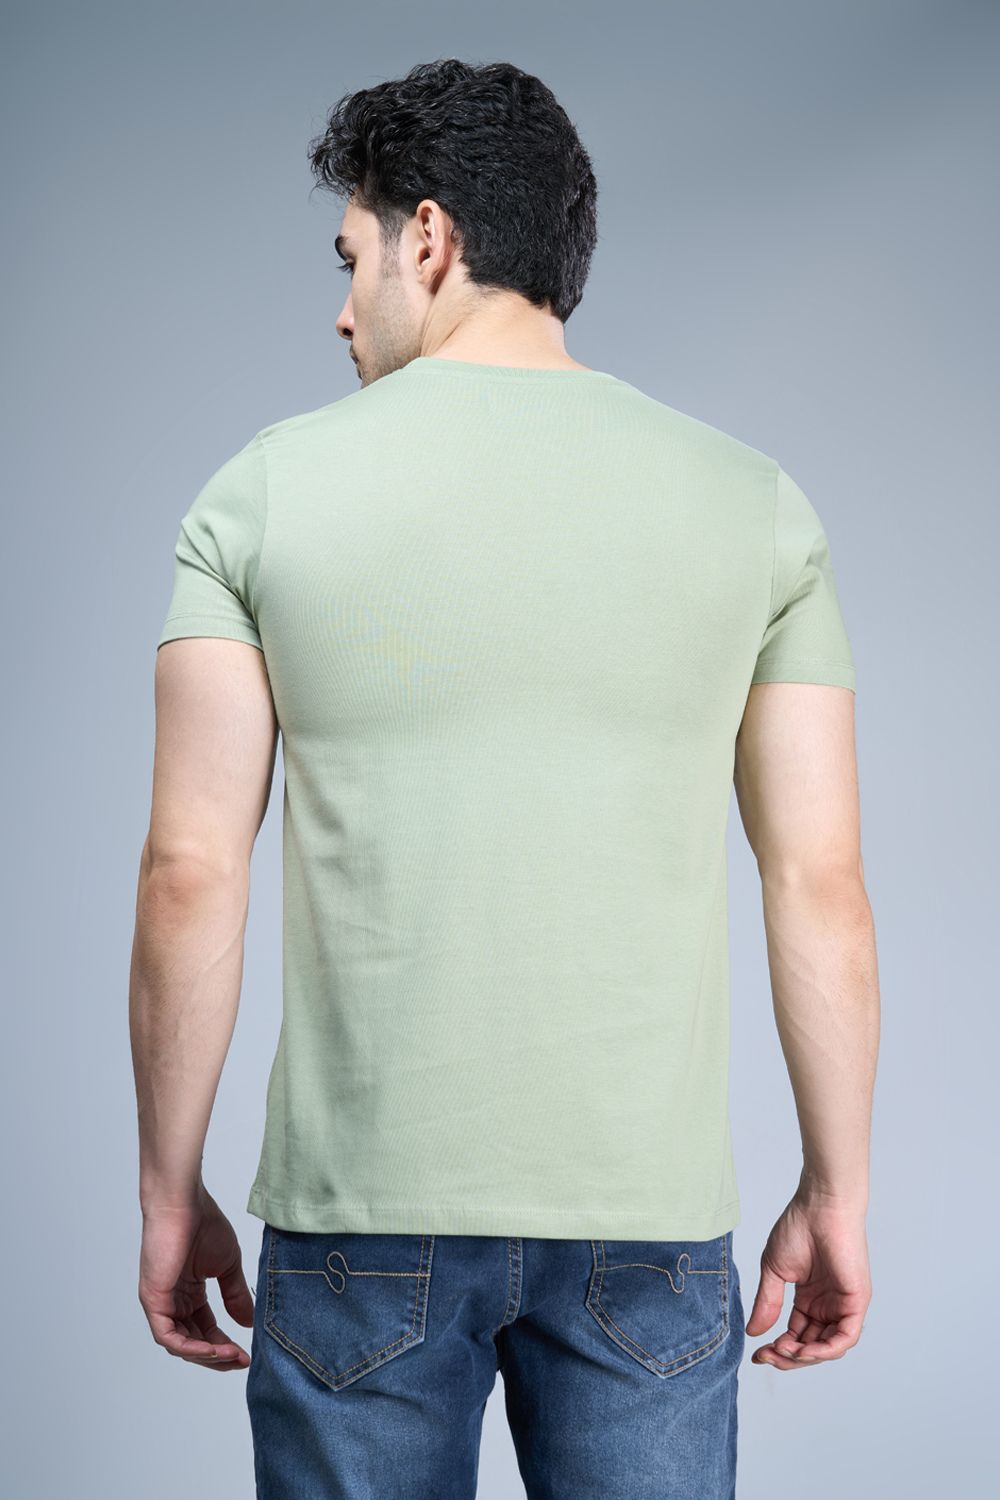 Cyan green colored, cotton Graphic T shirt for men, half sleeves and round neck, back view.